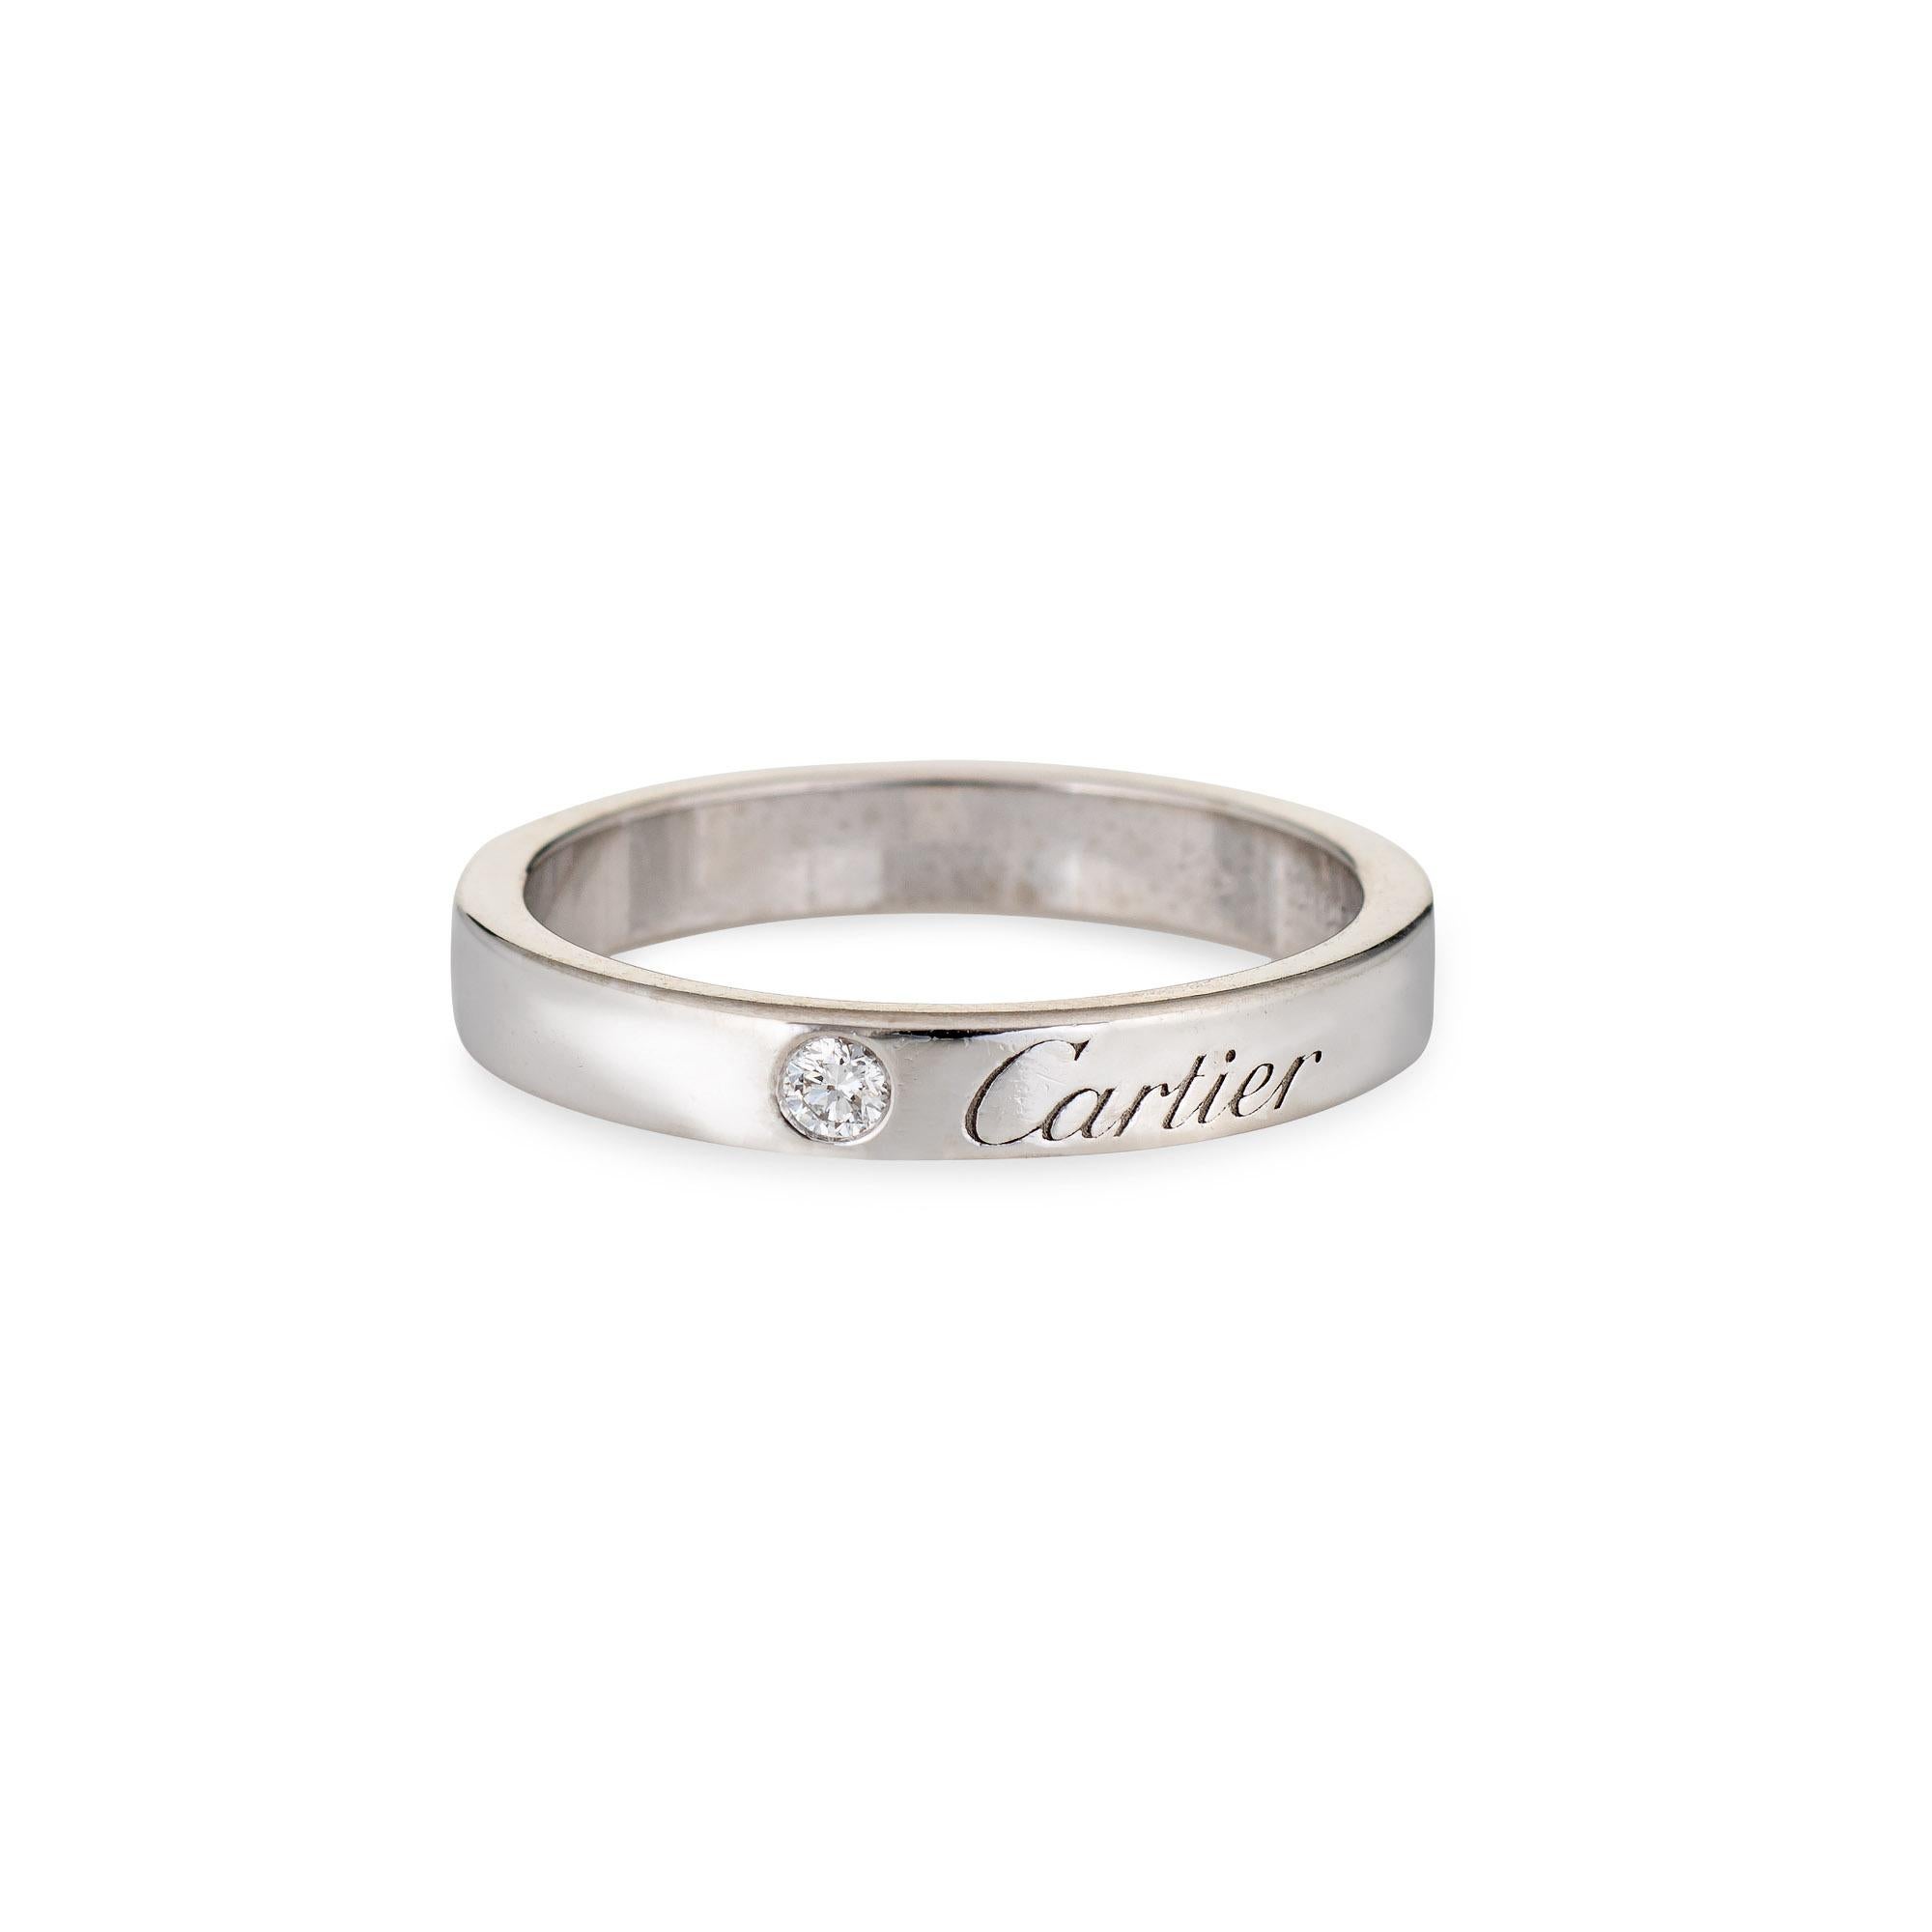 Pre-owned C De Cartier wedding ring crafted in platinum.  

One estimated 0.03 carat diamond is set into the band (estimated at F-G color and VVS2 clarity).
The Cartier ring is set with a small diamond next to the Cartier script. The band measures